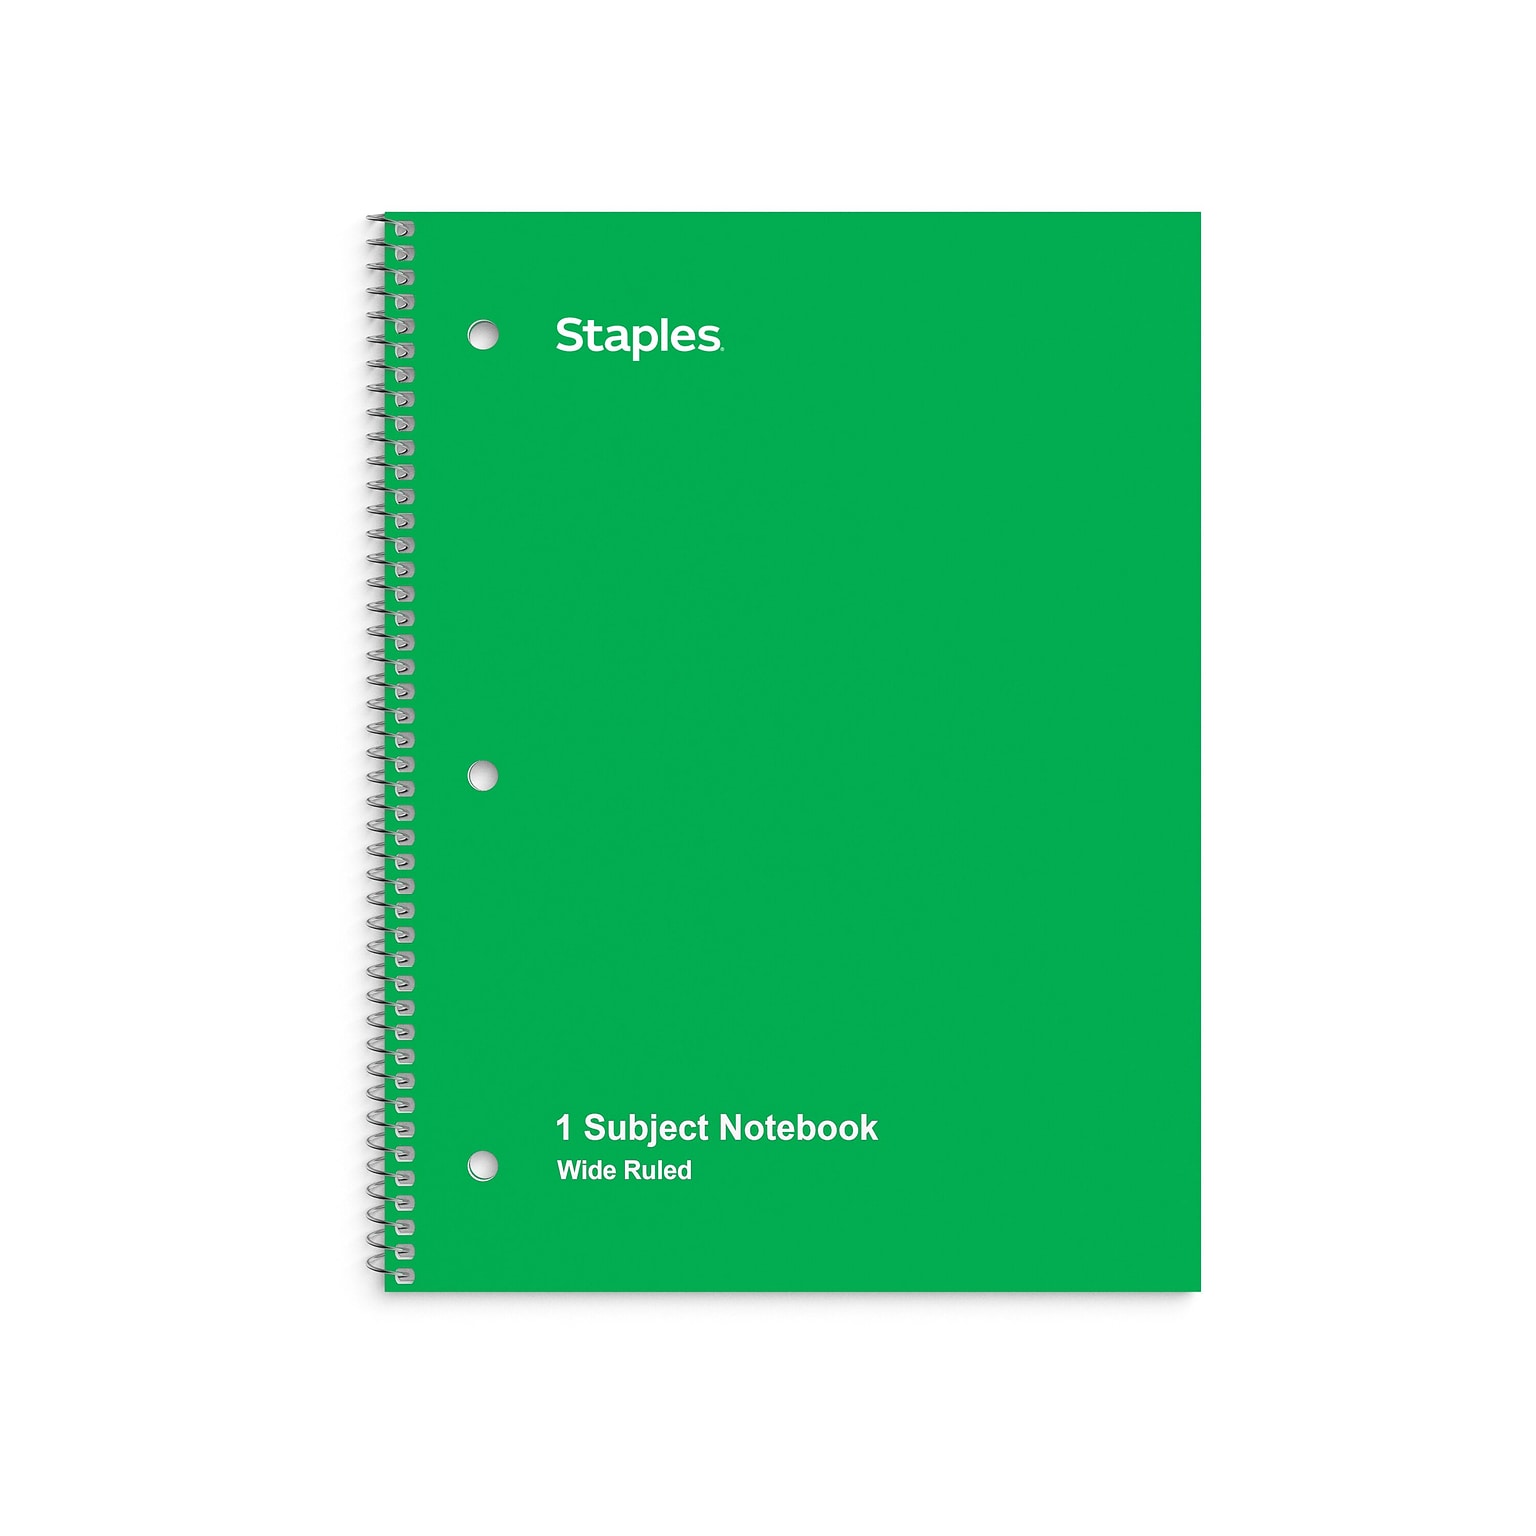 Staples 1-Subject Notebook, 8 x 10.5, Wide Ruled, 70 Sheets, Green (TR24006)